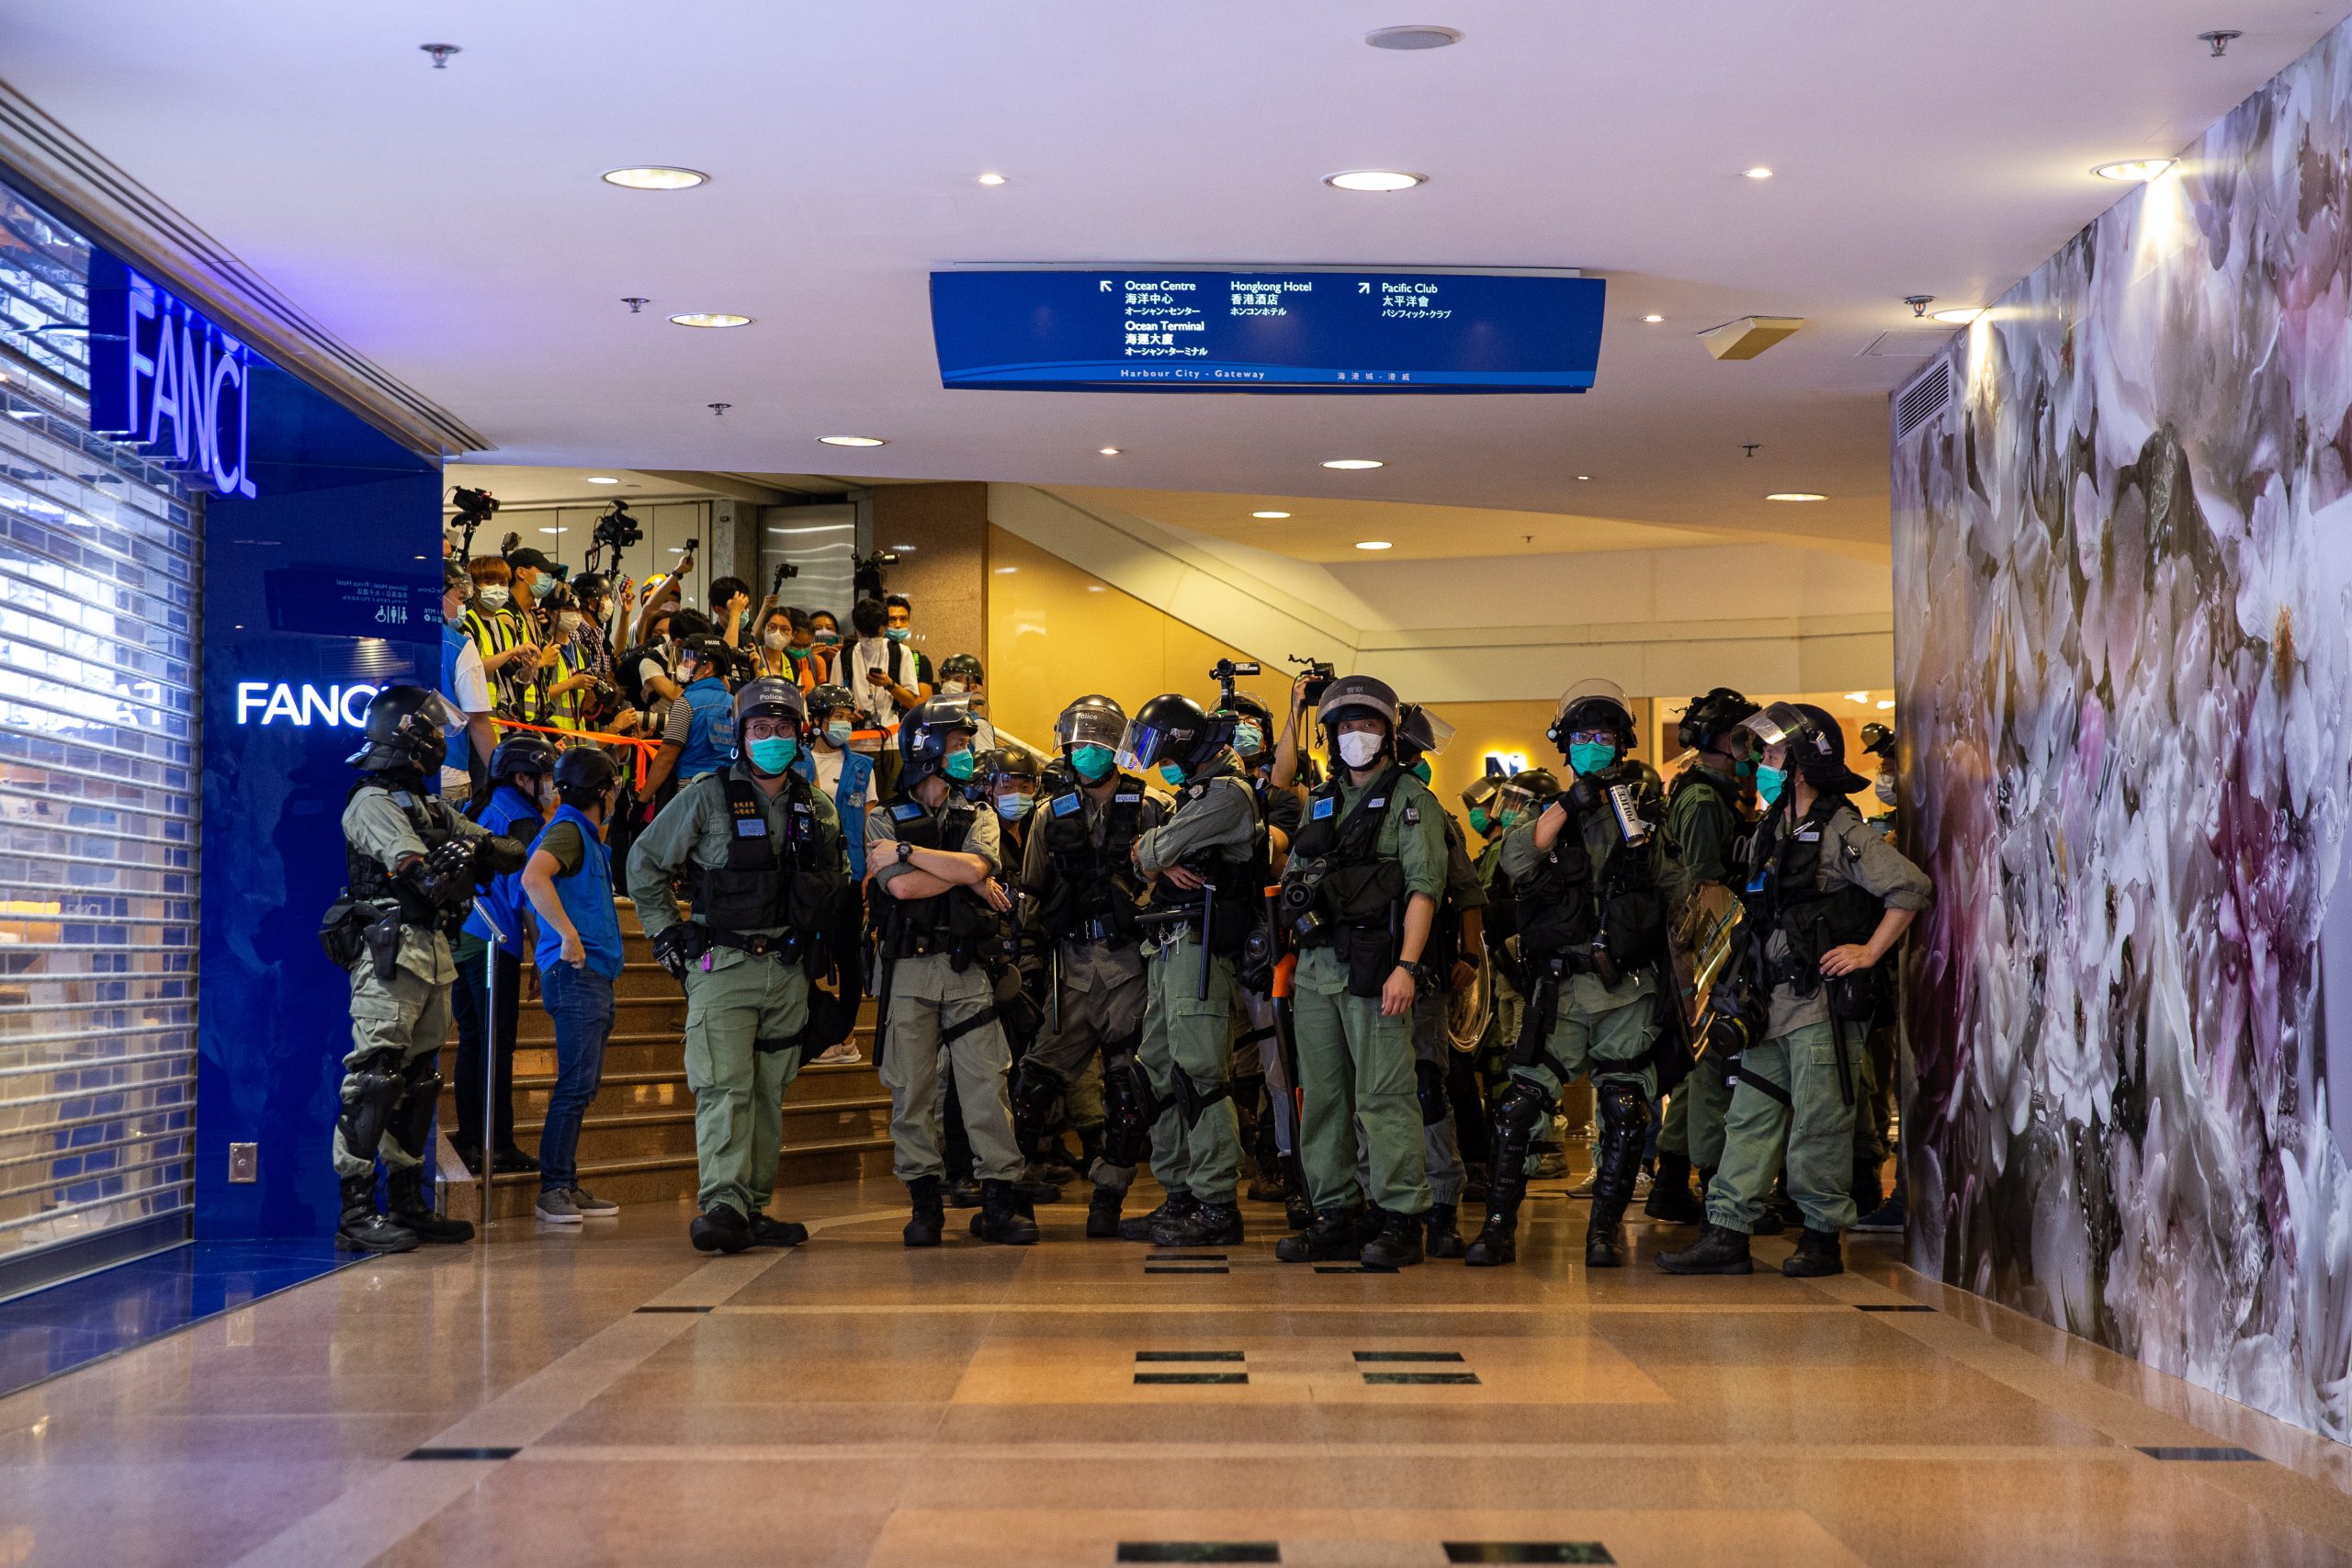 epa08413030 Police officers clear a shopping mall of protesters during a 'sing with you' protest at a shopping mall in Hong Kong, China, 10 May 2020. A heavy police presence in Tsim Sha Tsui thwarted plans for a pro-independence march, but several 'sing with you' protests popped up at several malls across Hong Kong.  EPA/JEROME FAVRE